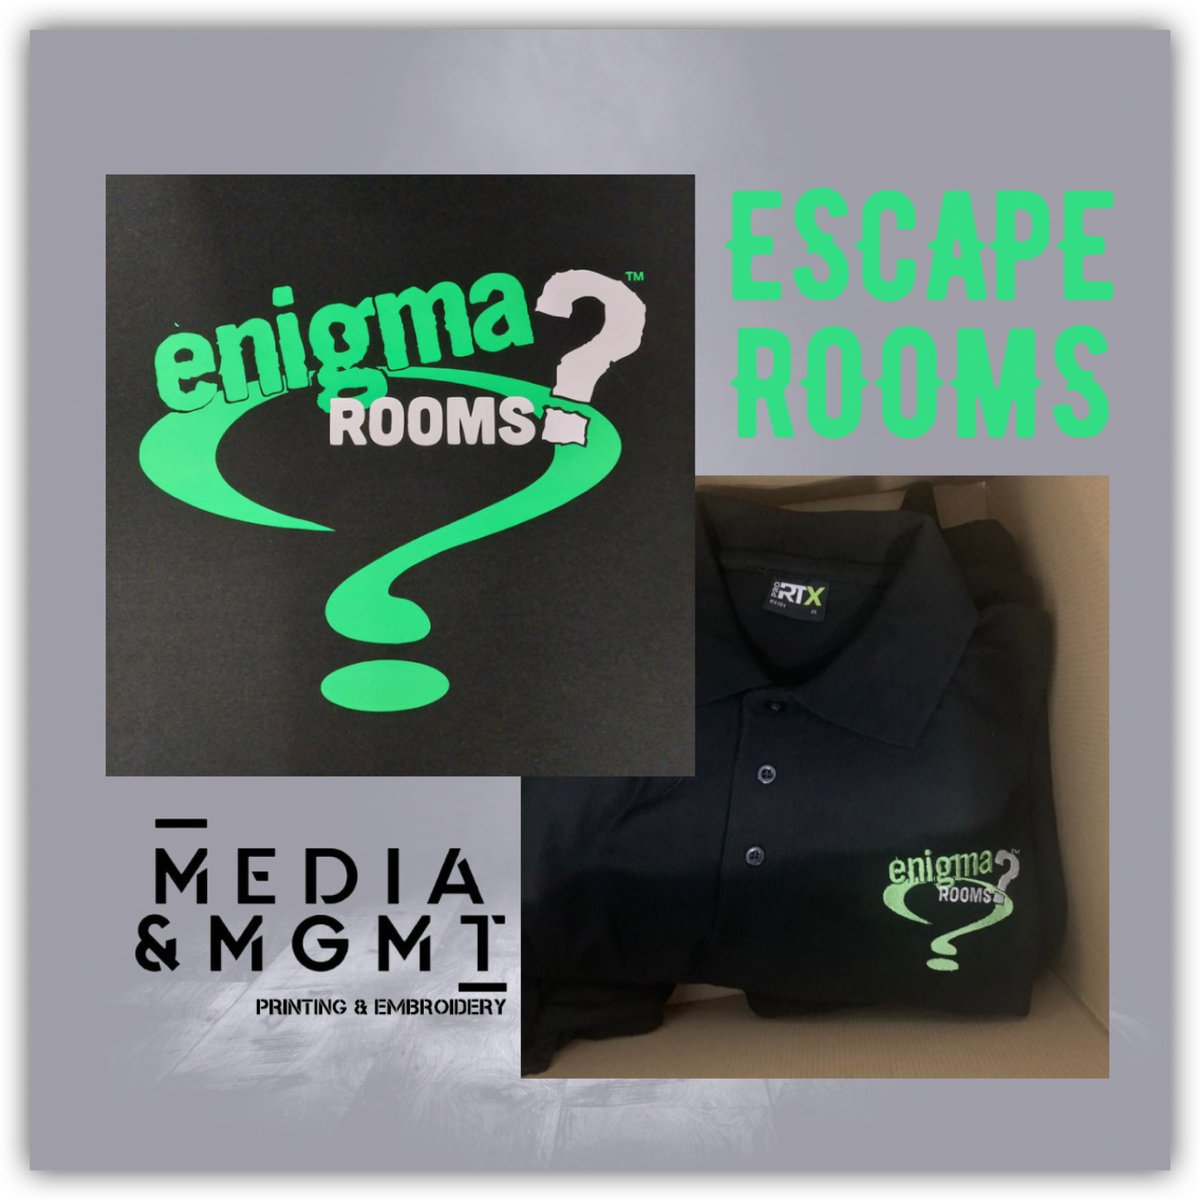 Custom print and embroidery for @EnigmaRooms1 🙌🏽⁉️

#enigmarooms #doncaster #doncasterisgreat #escaperoom 
#mediamgmtprintingandembroidery #printing #dancewear #doncasterisgreat #uniform #customprints #doncasterbusiness #logoprinting #printingsolutions #printingexperts